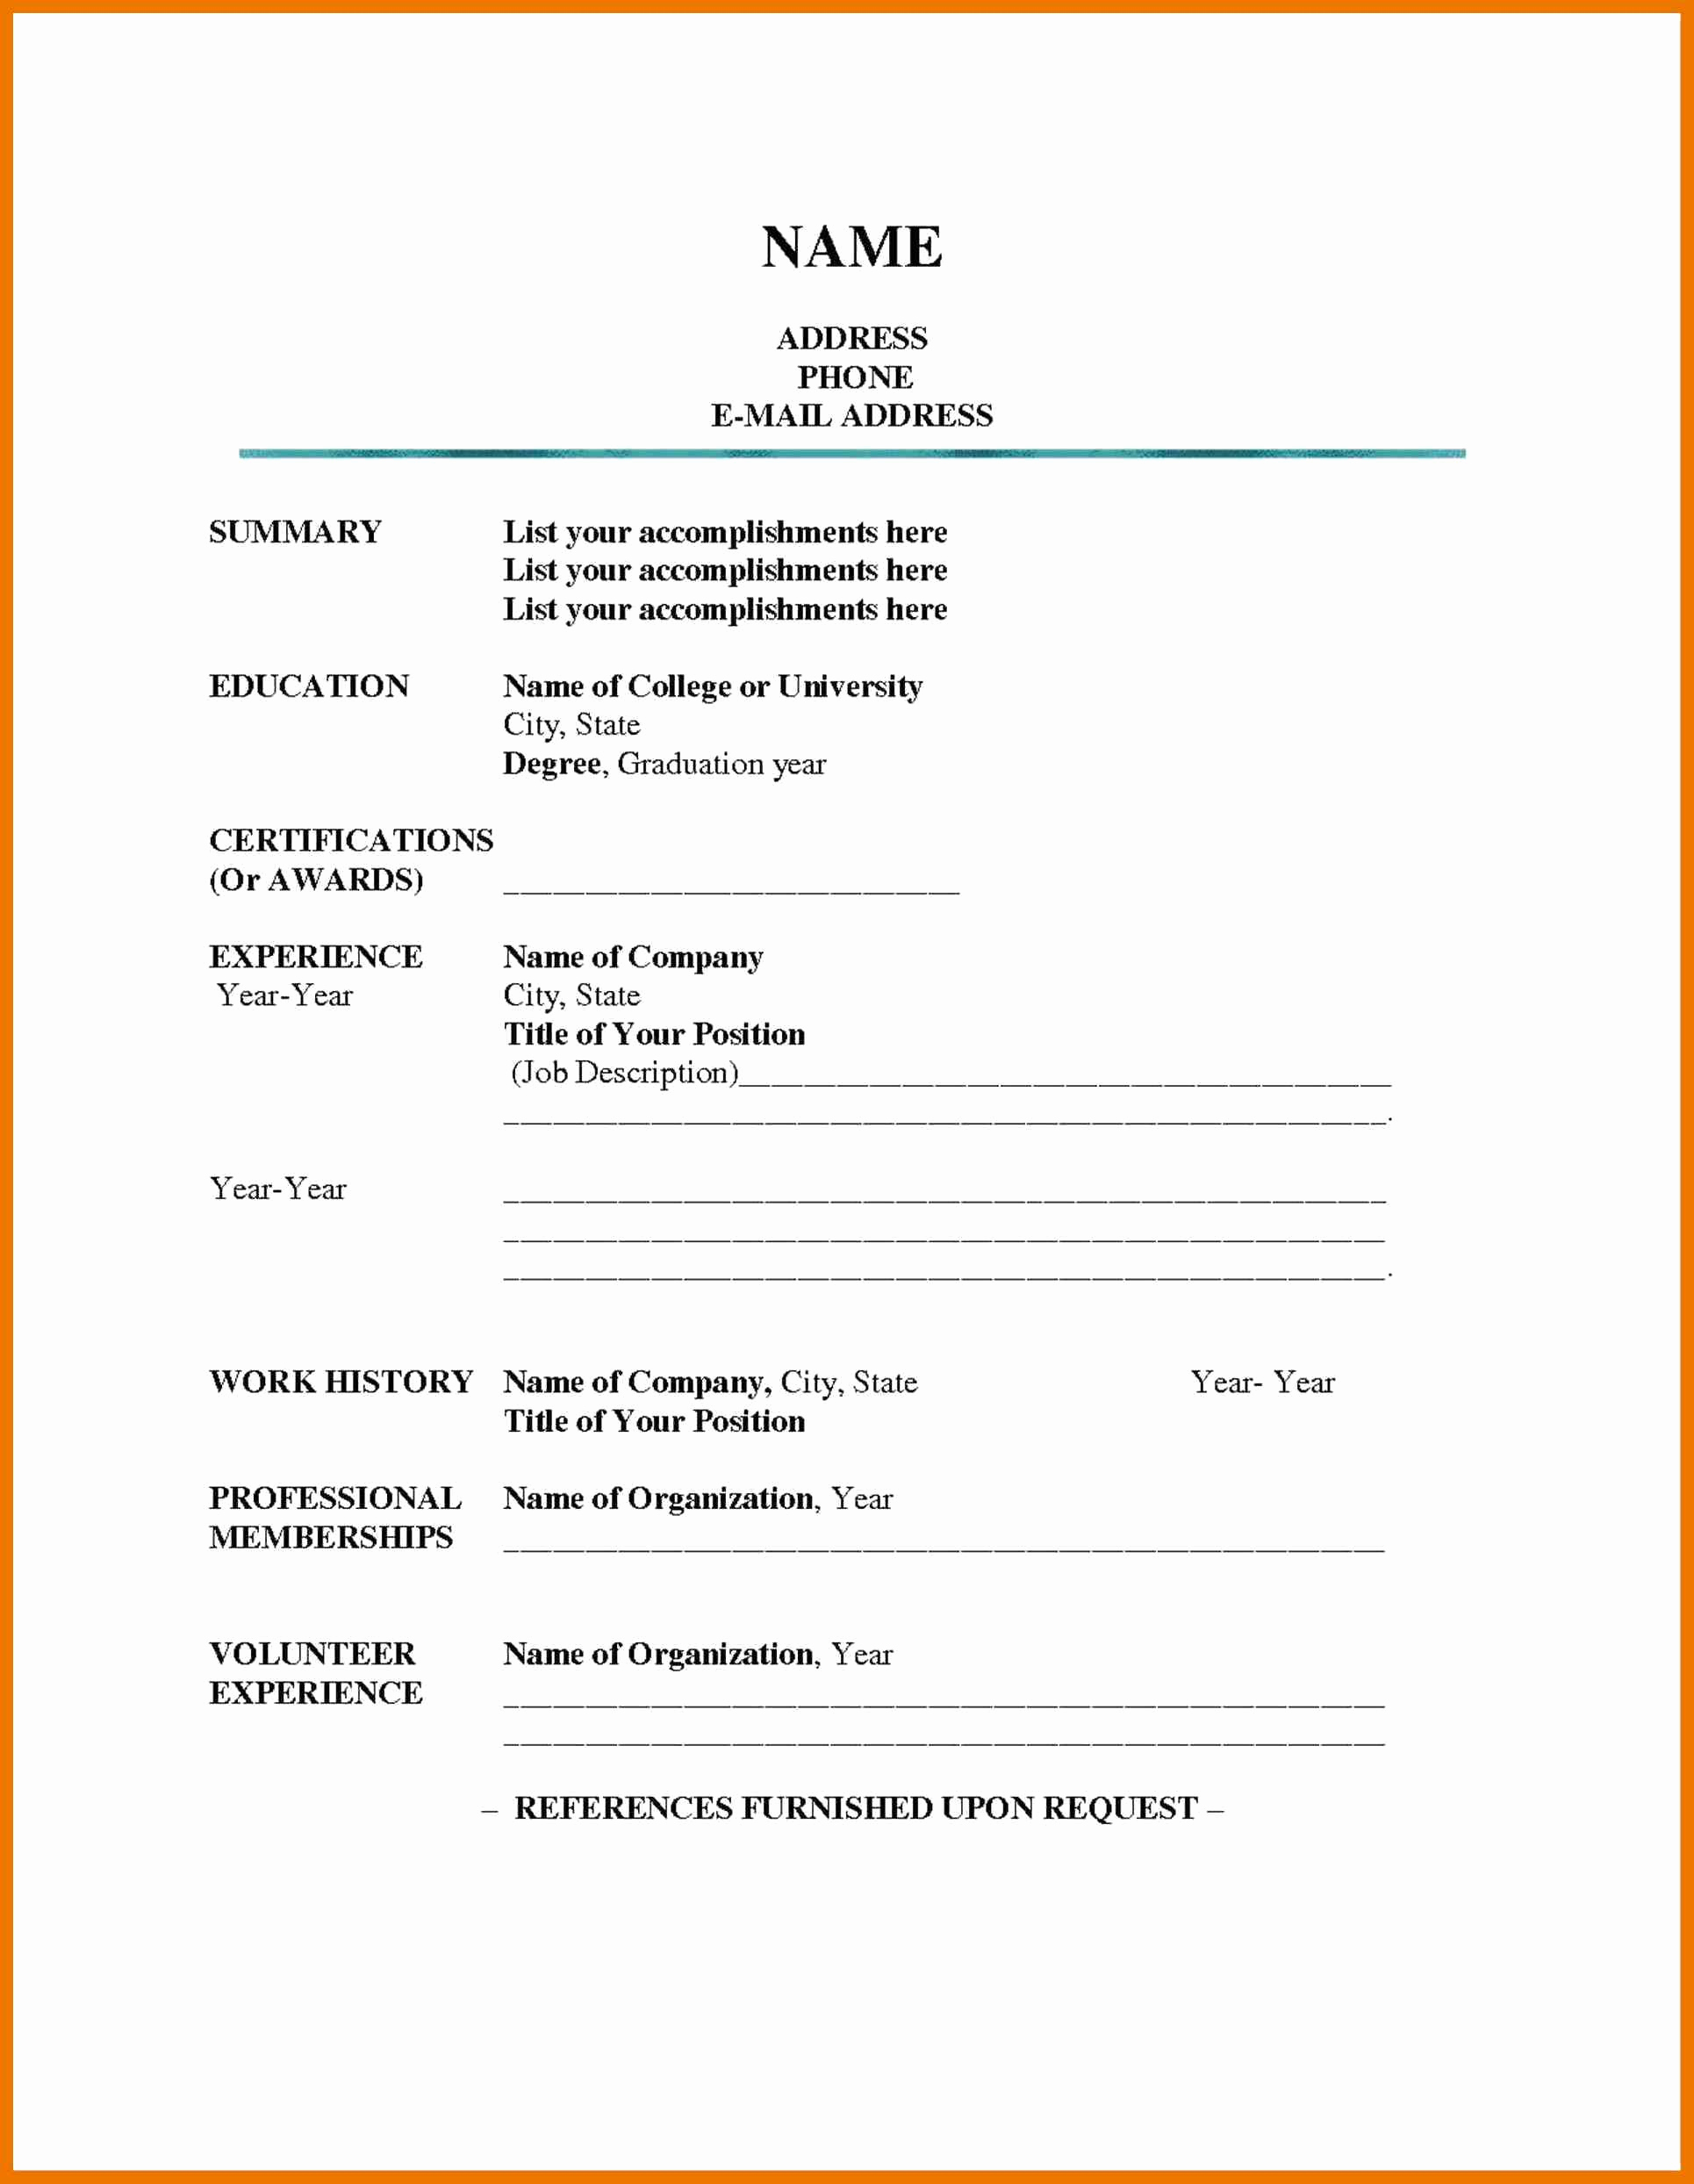 Fill In the Blank Resume Luxury forms Resume